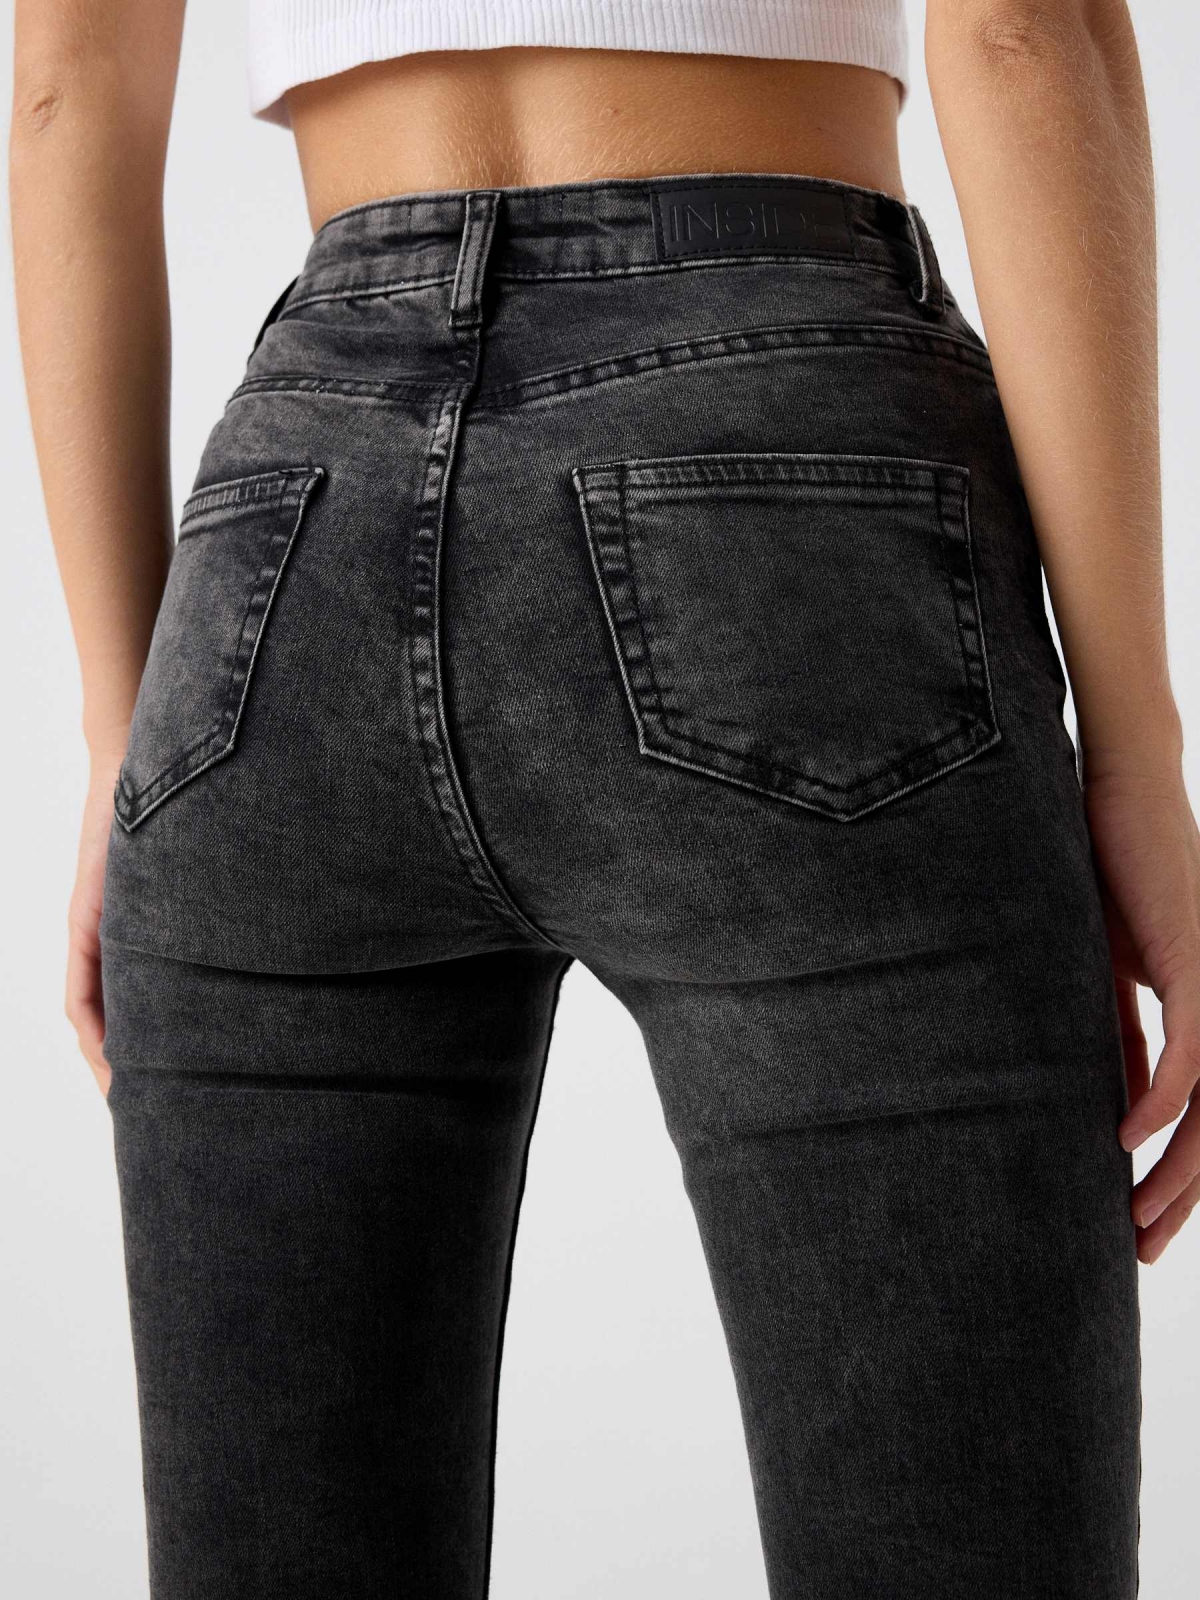 Washed black high waisted skinny jeans black detail view